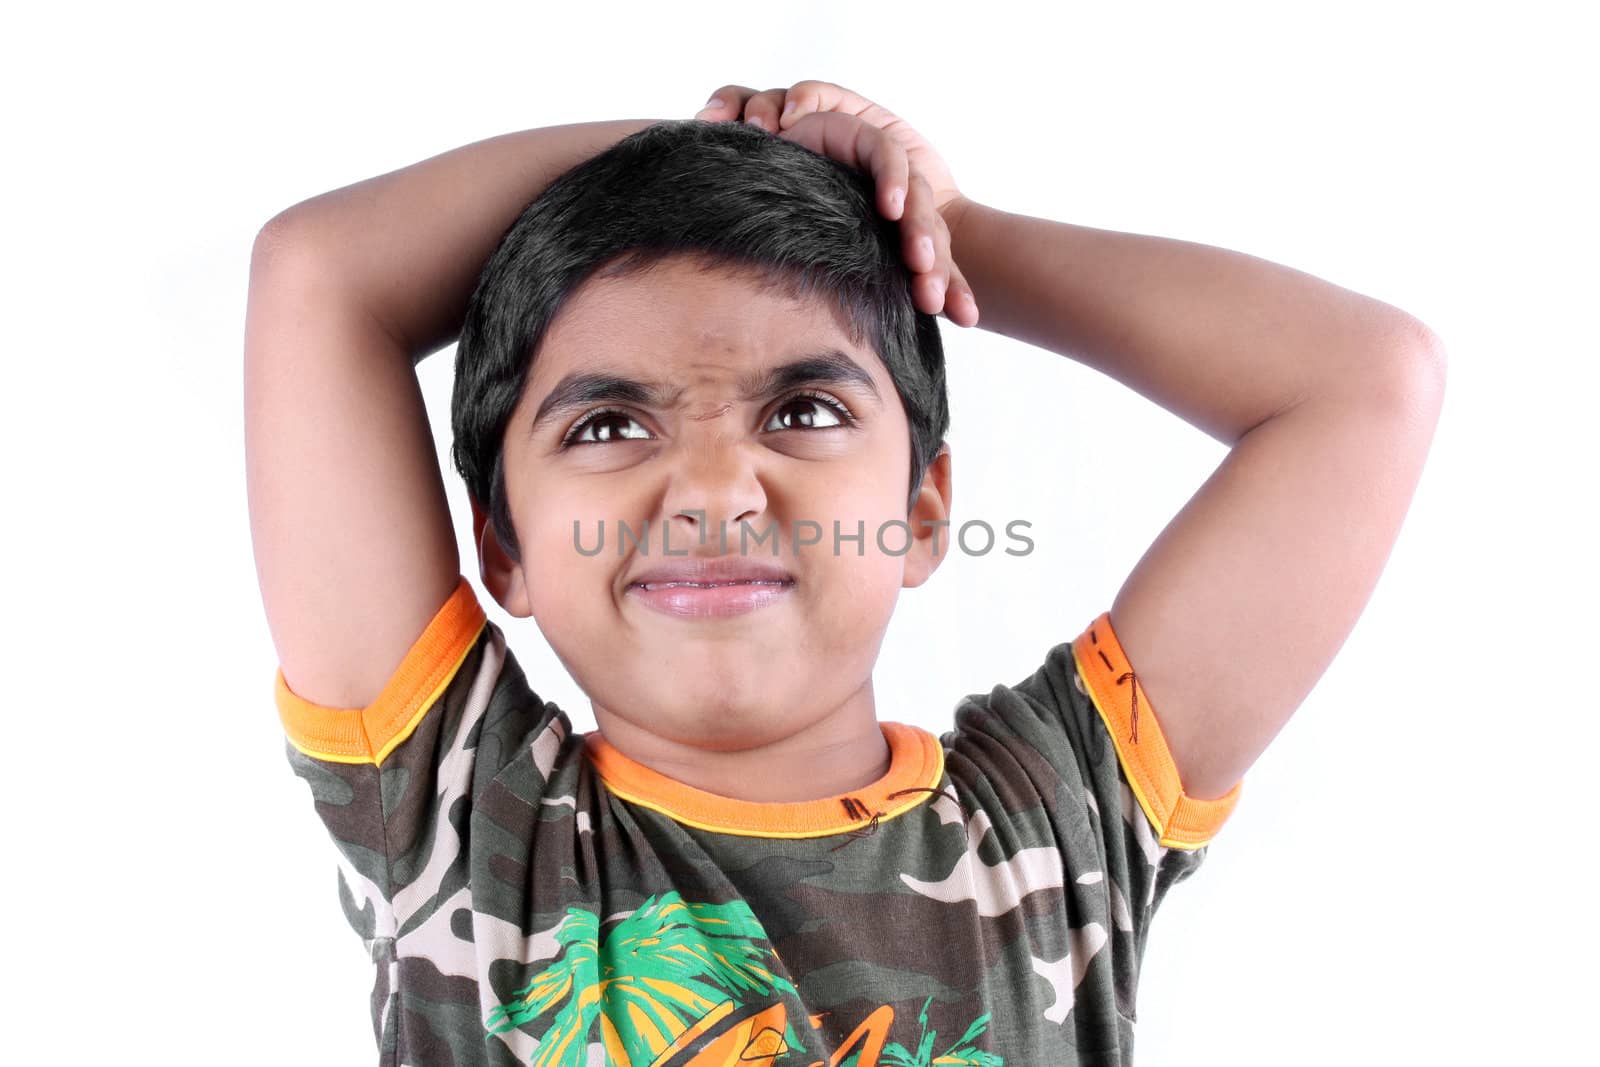 A metaphorical portrait of a cute Indian boy expressing his dislike about something, on white studio background.